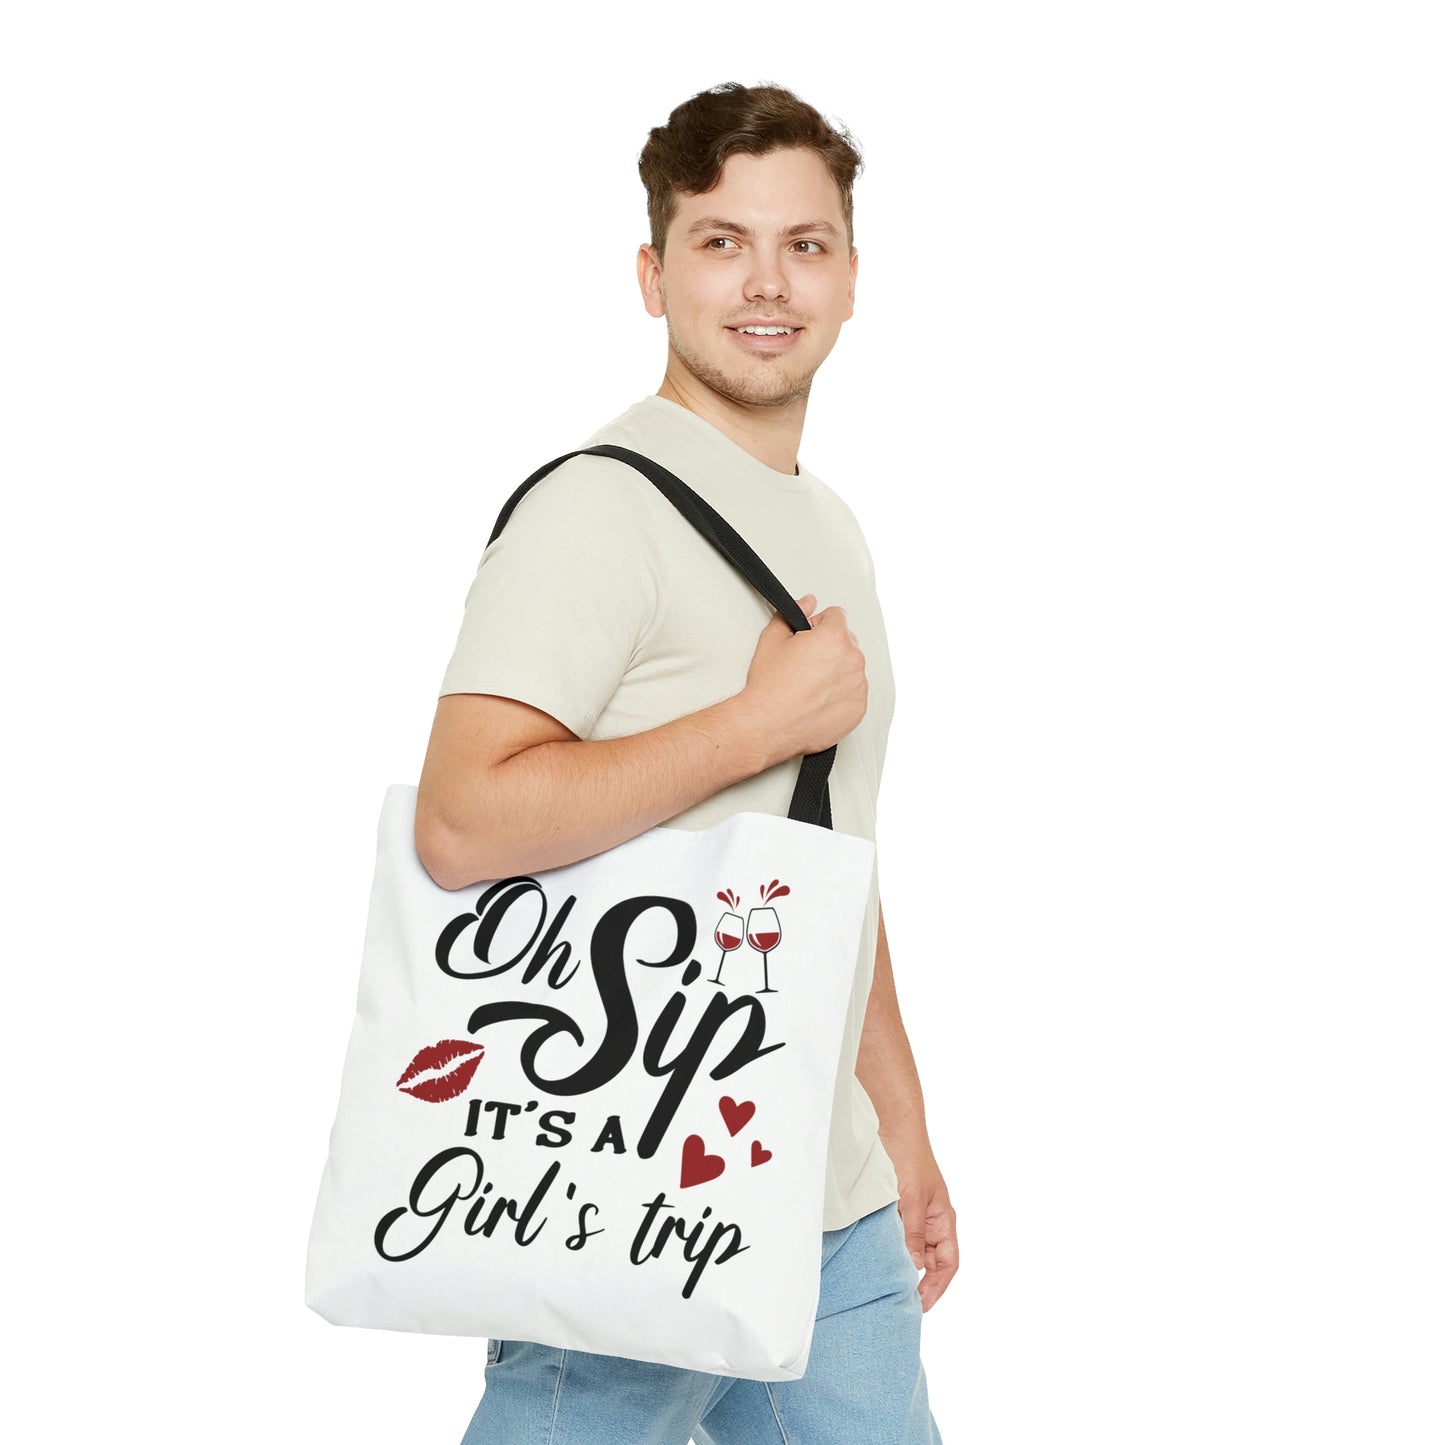 OH SIP IT'S A GIRLS TRIP TOTE BAG